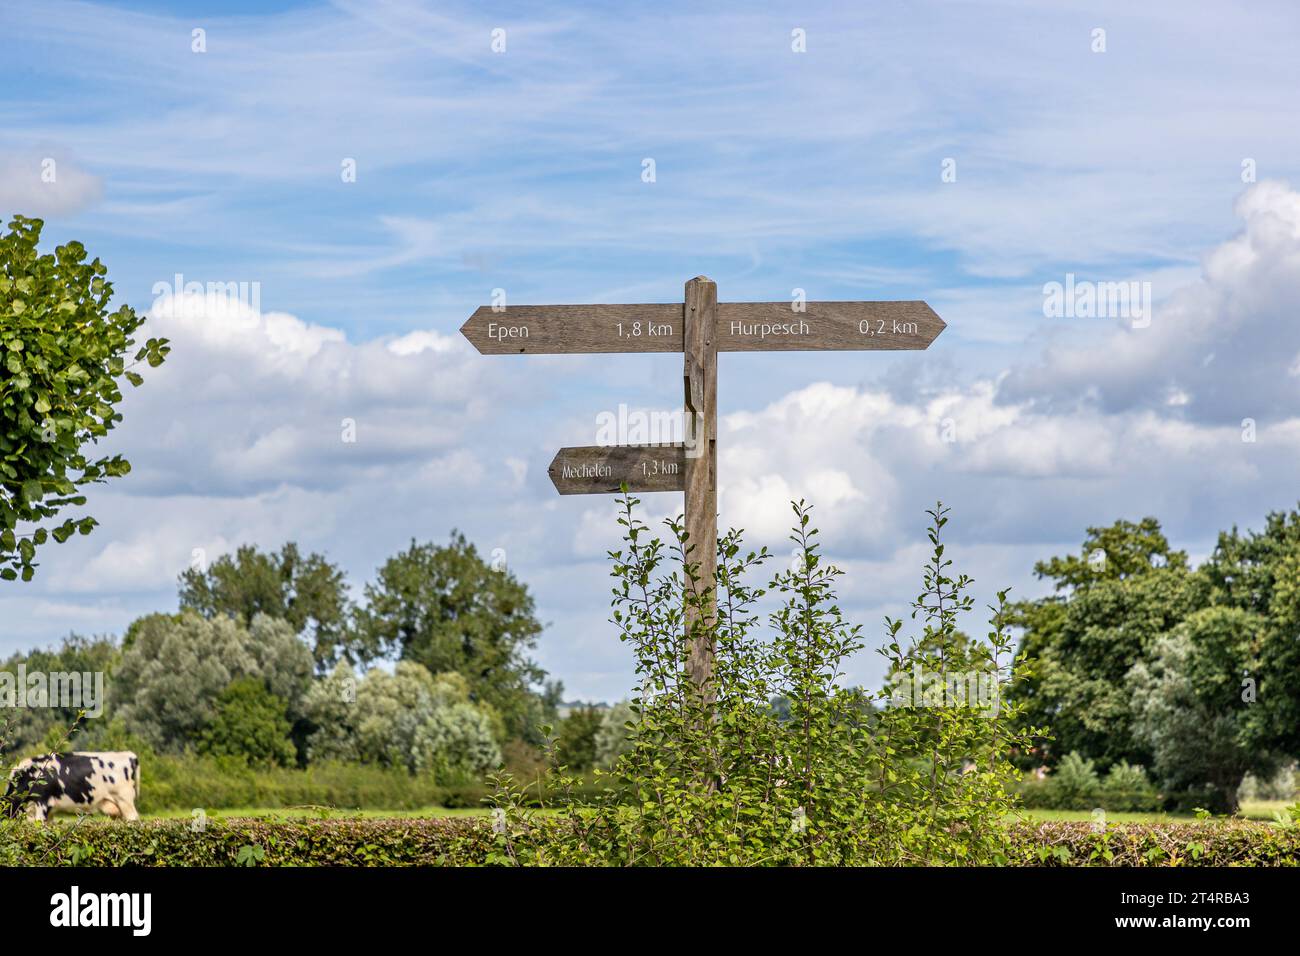 Crossroads in Gulpen-Wittem region, towards Towns: Epen, Hurpesch and Mechelen, hiking trails, Dutch countryside against blue sky, trees in blurred ba Stock Photo